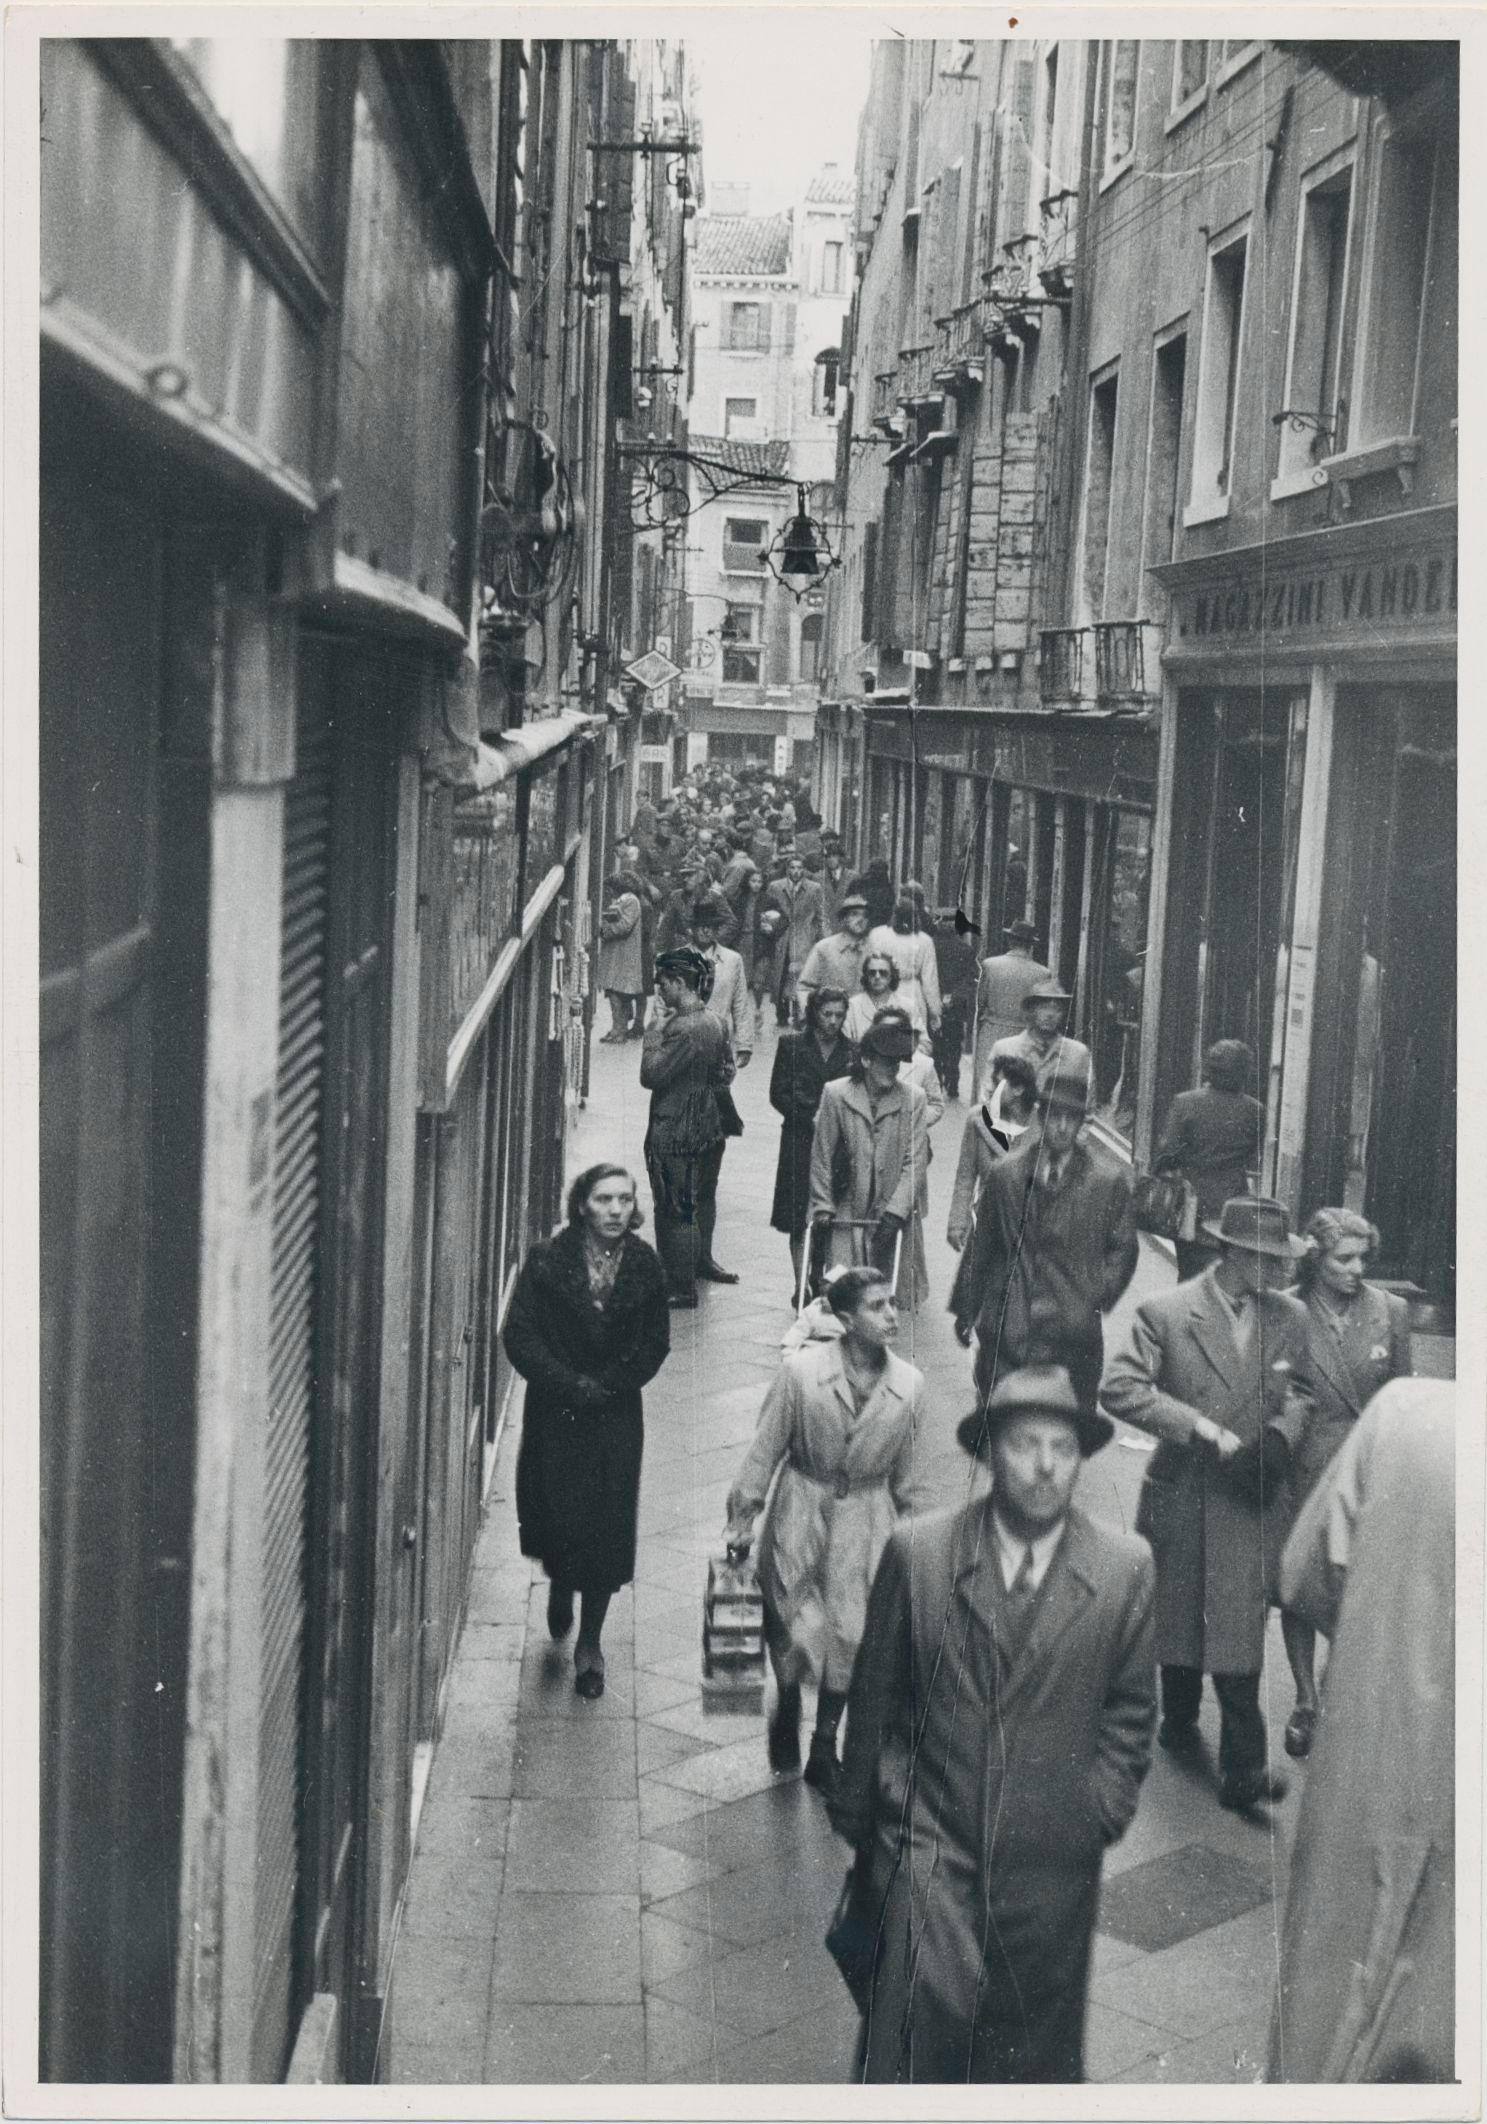 Venice, Venetia, Shopping Street, Black and White, Italy 1950s, 17, 9 x 12, 5 cm - Photograph by Erich Andres